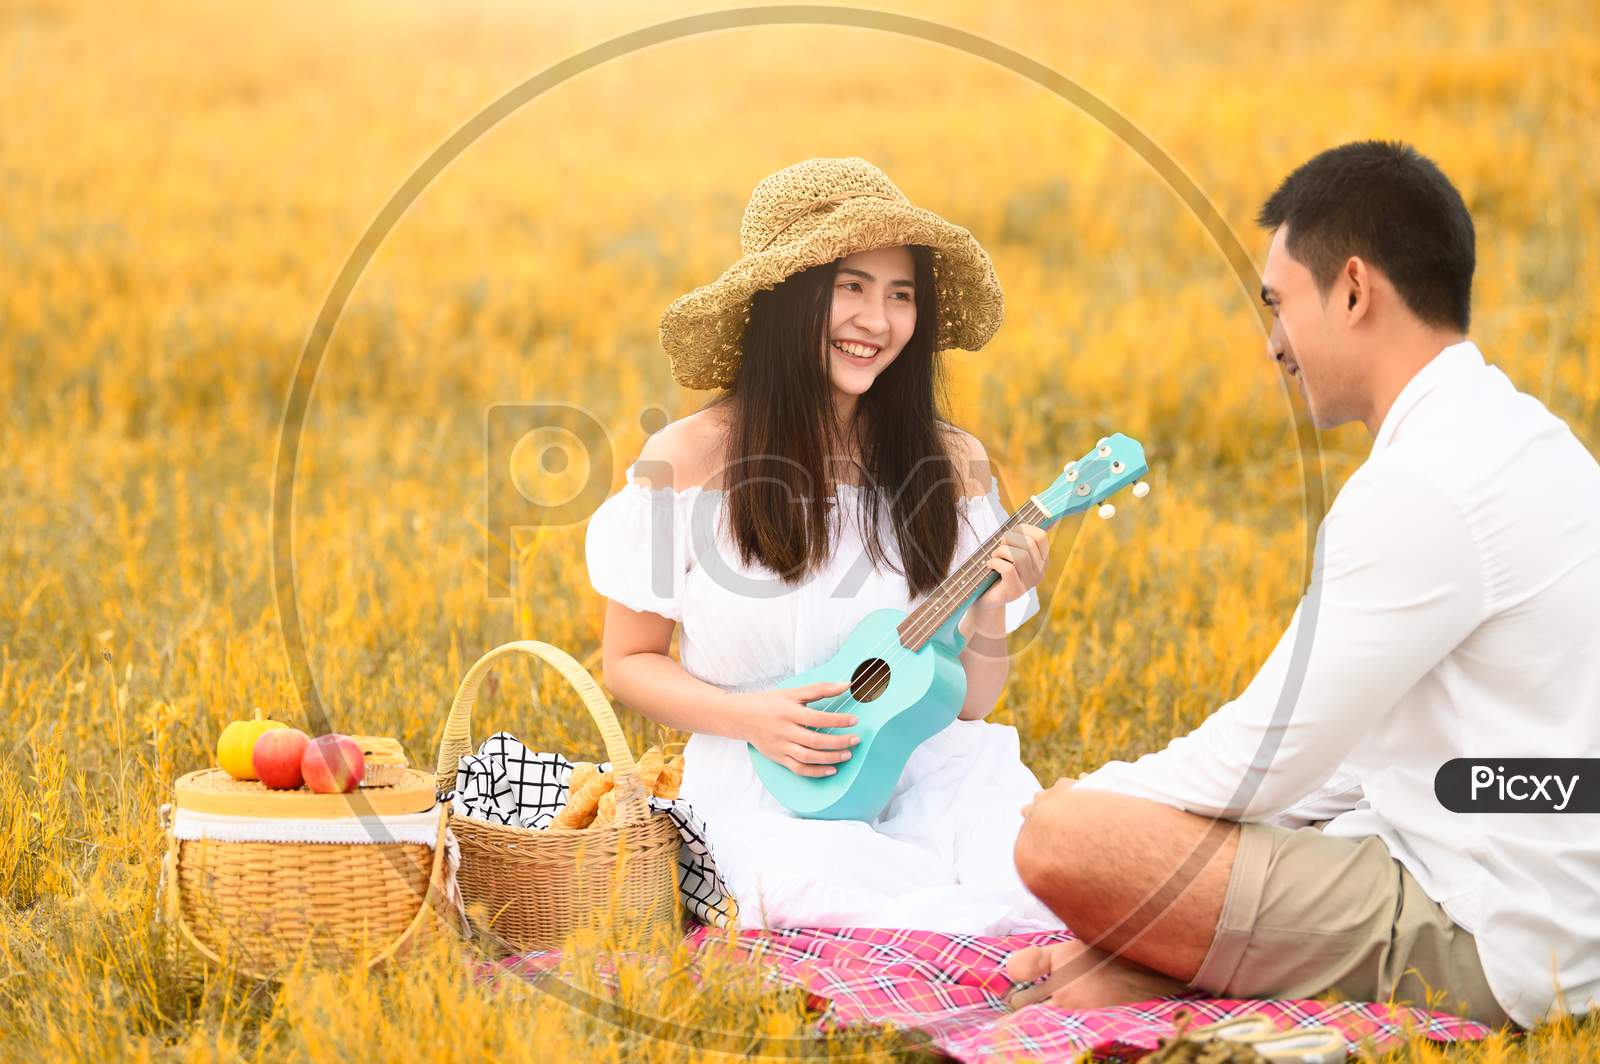 Two Asian Young Couples In Autumn Meadow Field Doing Picnic In Honeymoon Trip In White Clothes, Ukulele Guitar And Fruits Basket. People Lifestyle And Wedding Concept. Nature And Travel Day Concept.